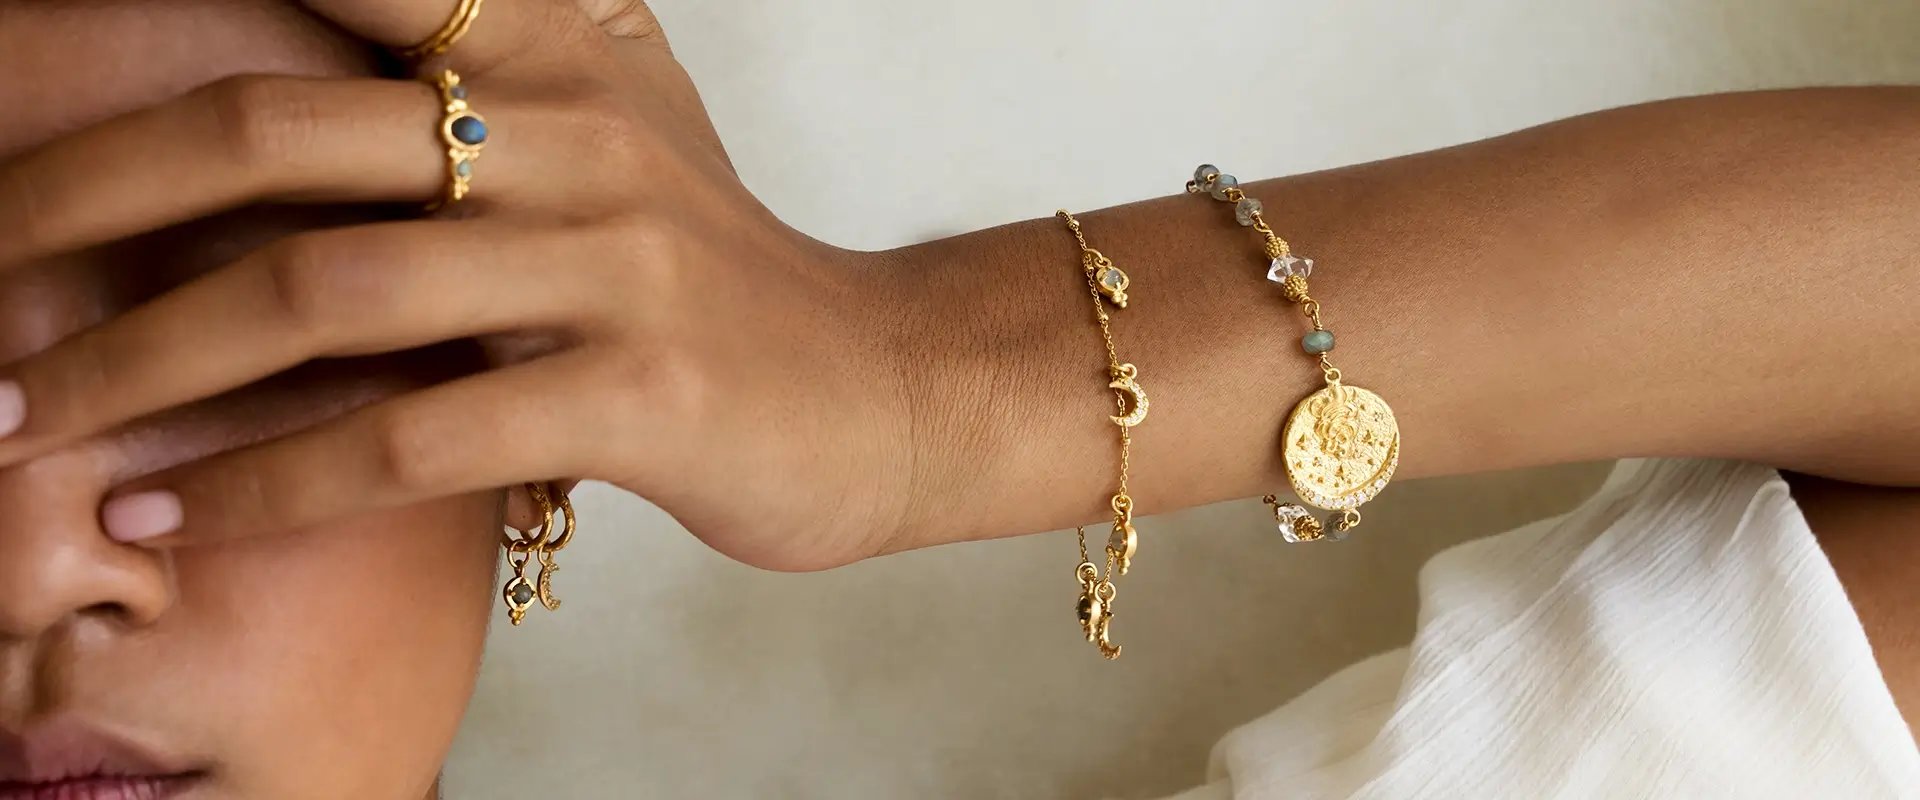 Bracelets Collection | Ethical & Hand-Made – Anandasoul